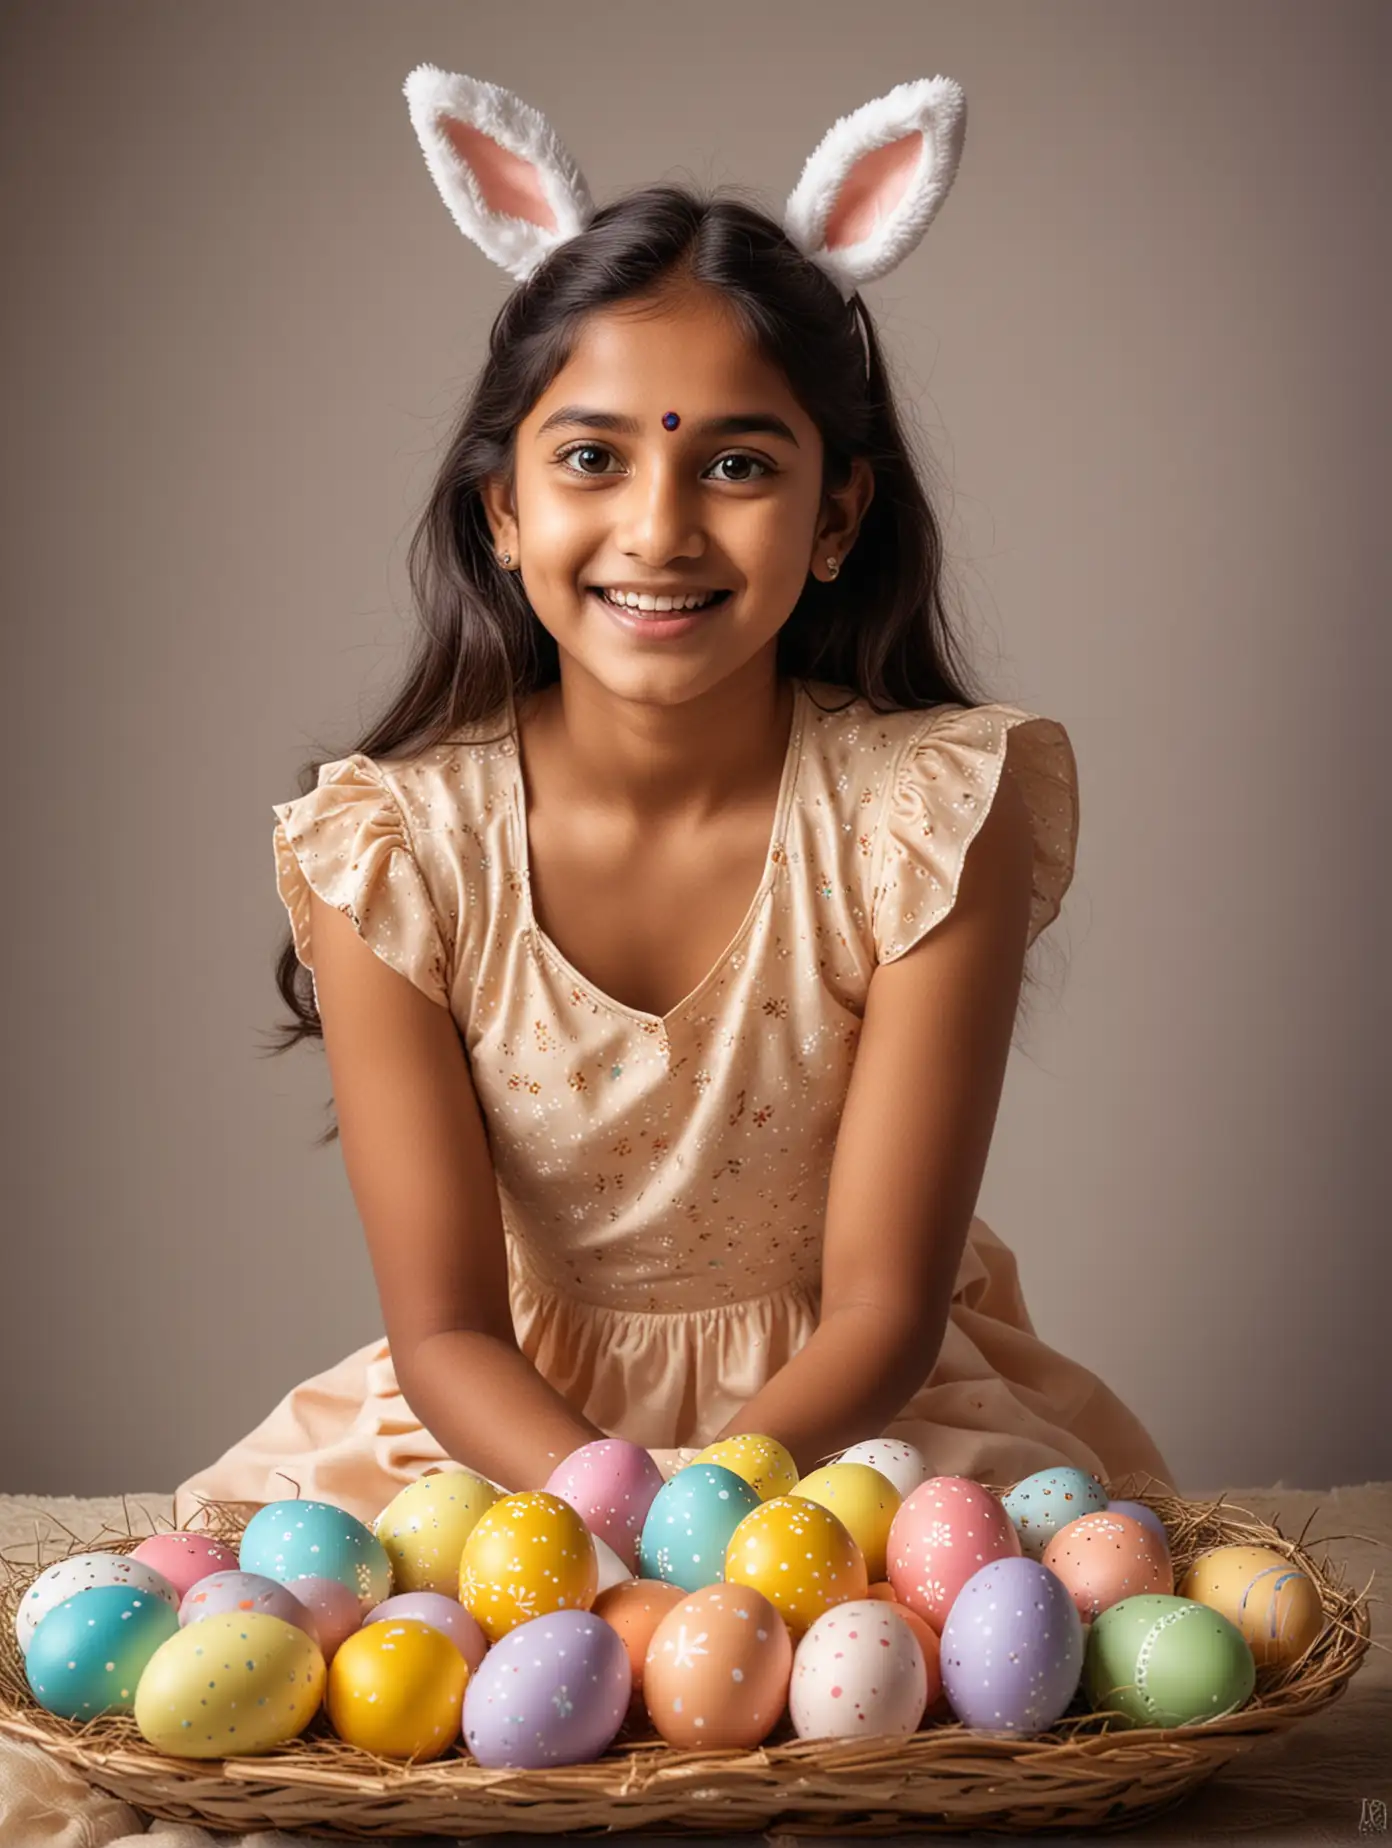 Indian girl, celebrating Easter, full of festive atmosphere, camera facing, exquisite facial features, professional photography technology, full body photo